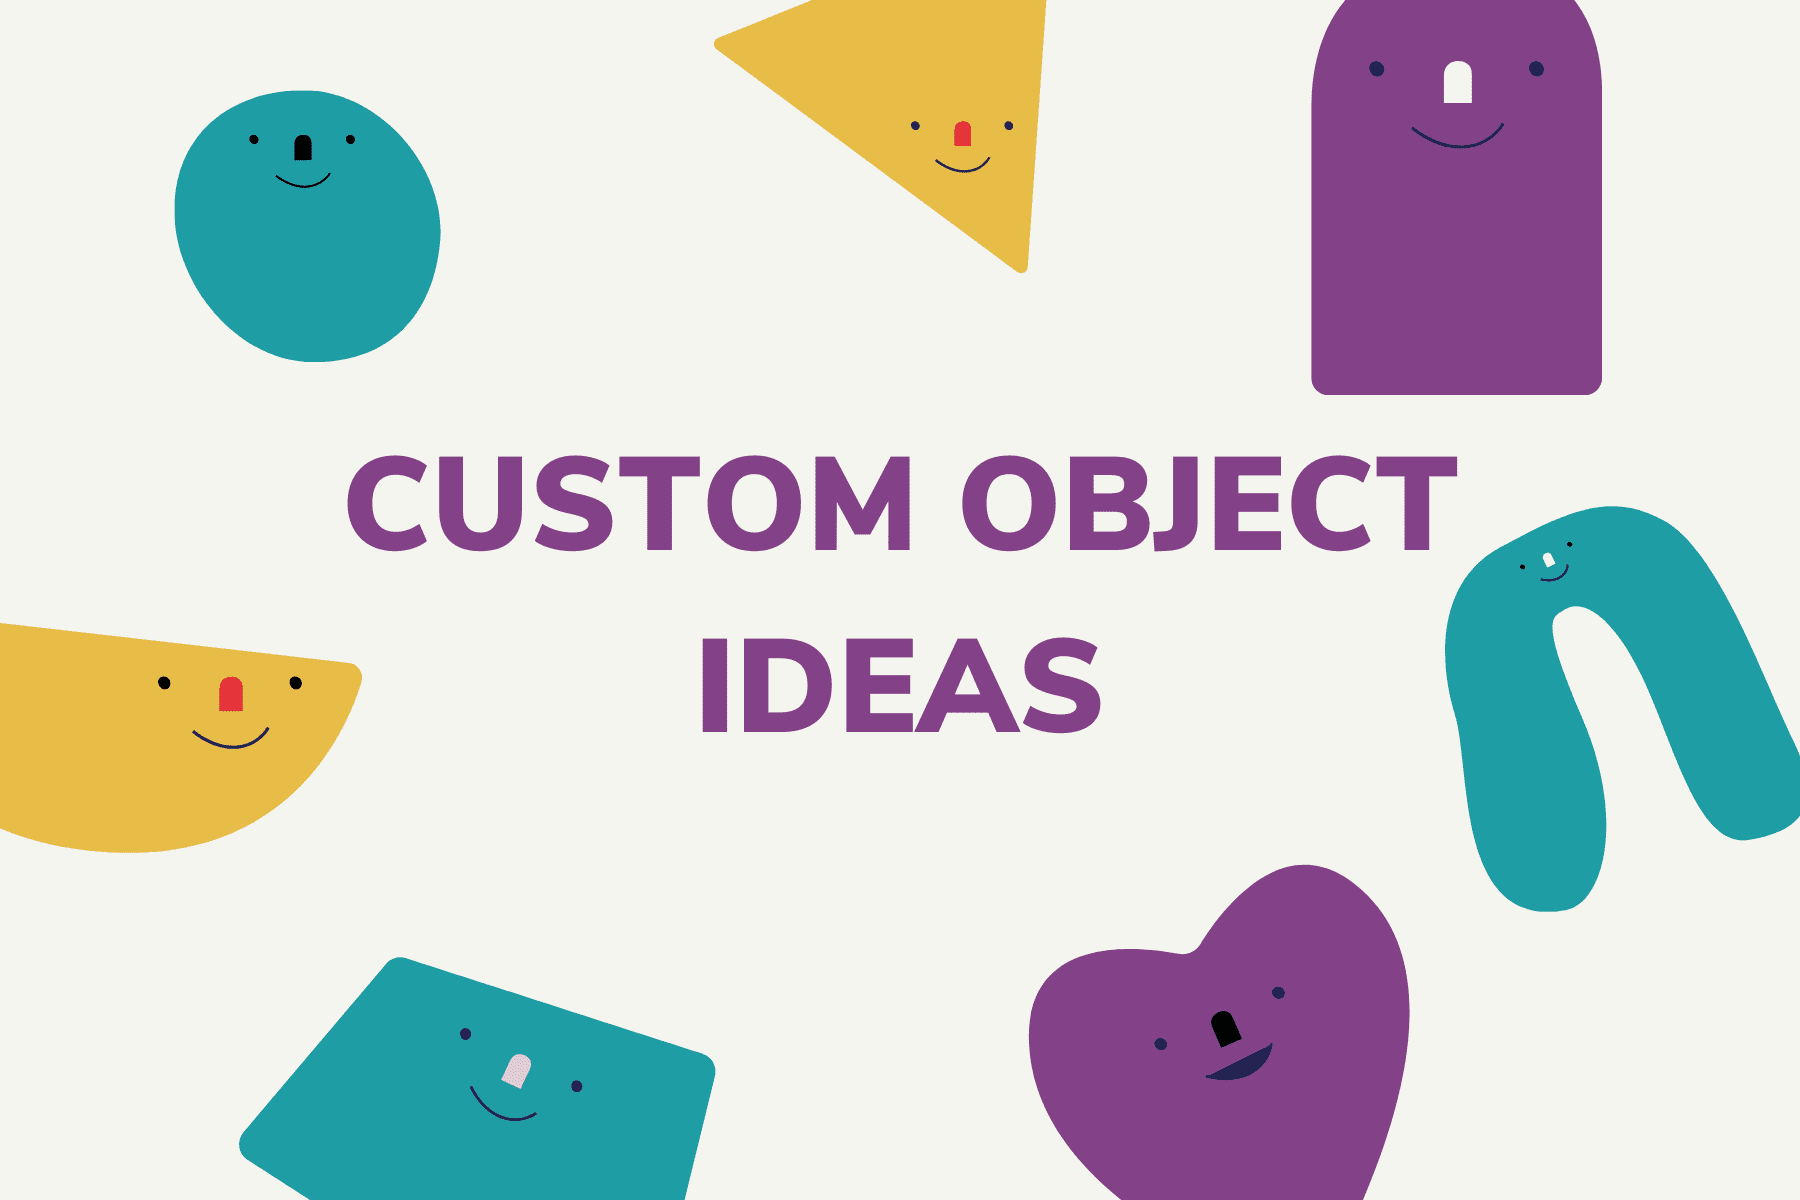 Custom objects ideas for colleges